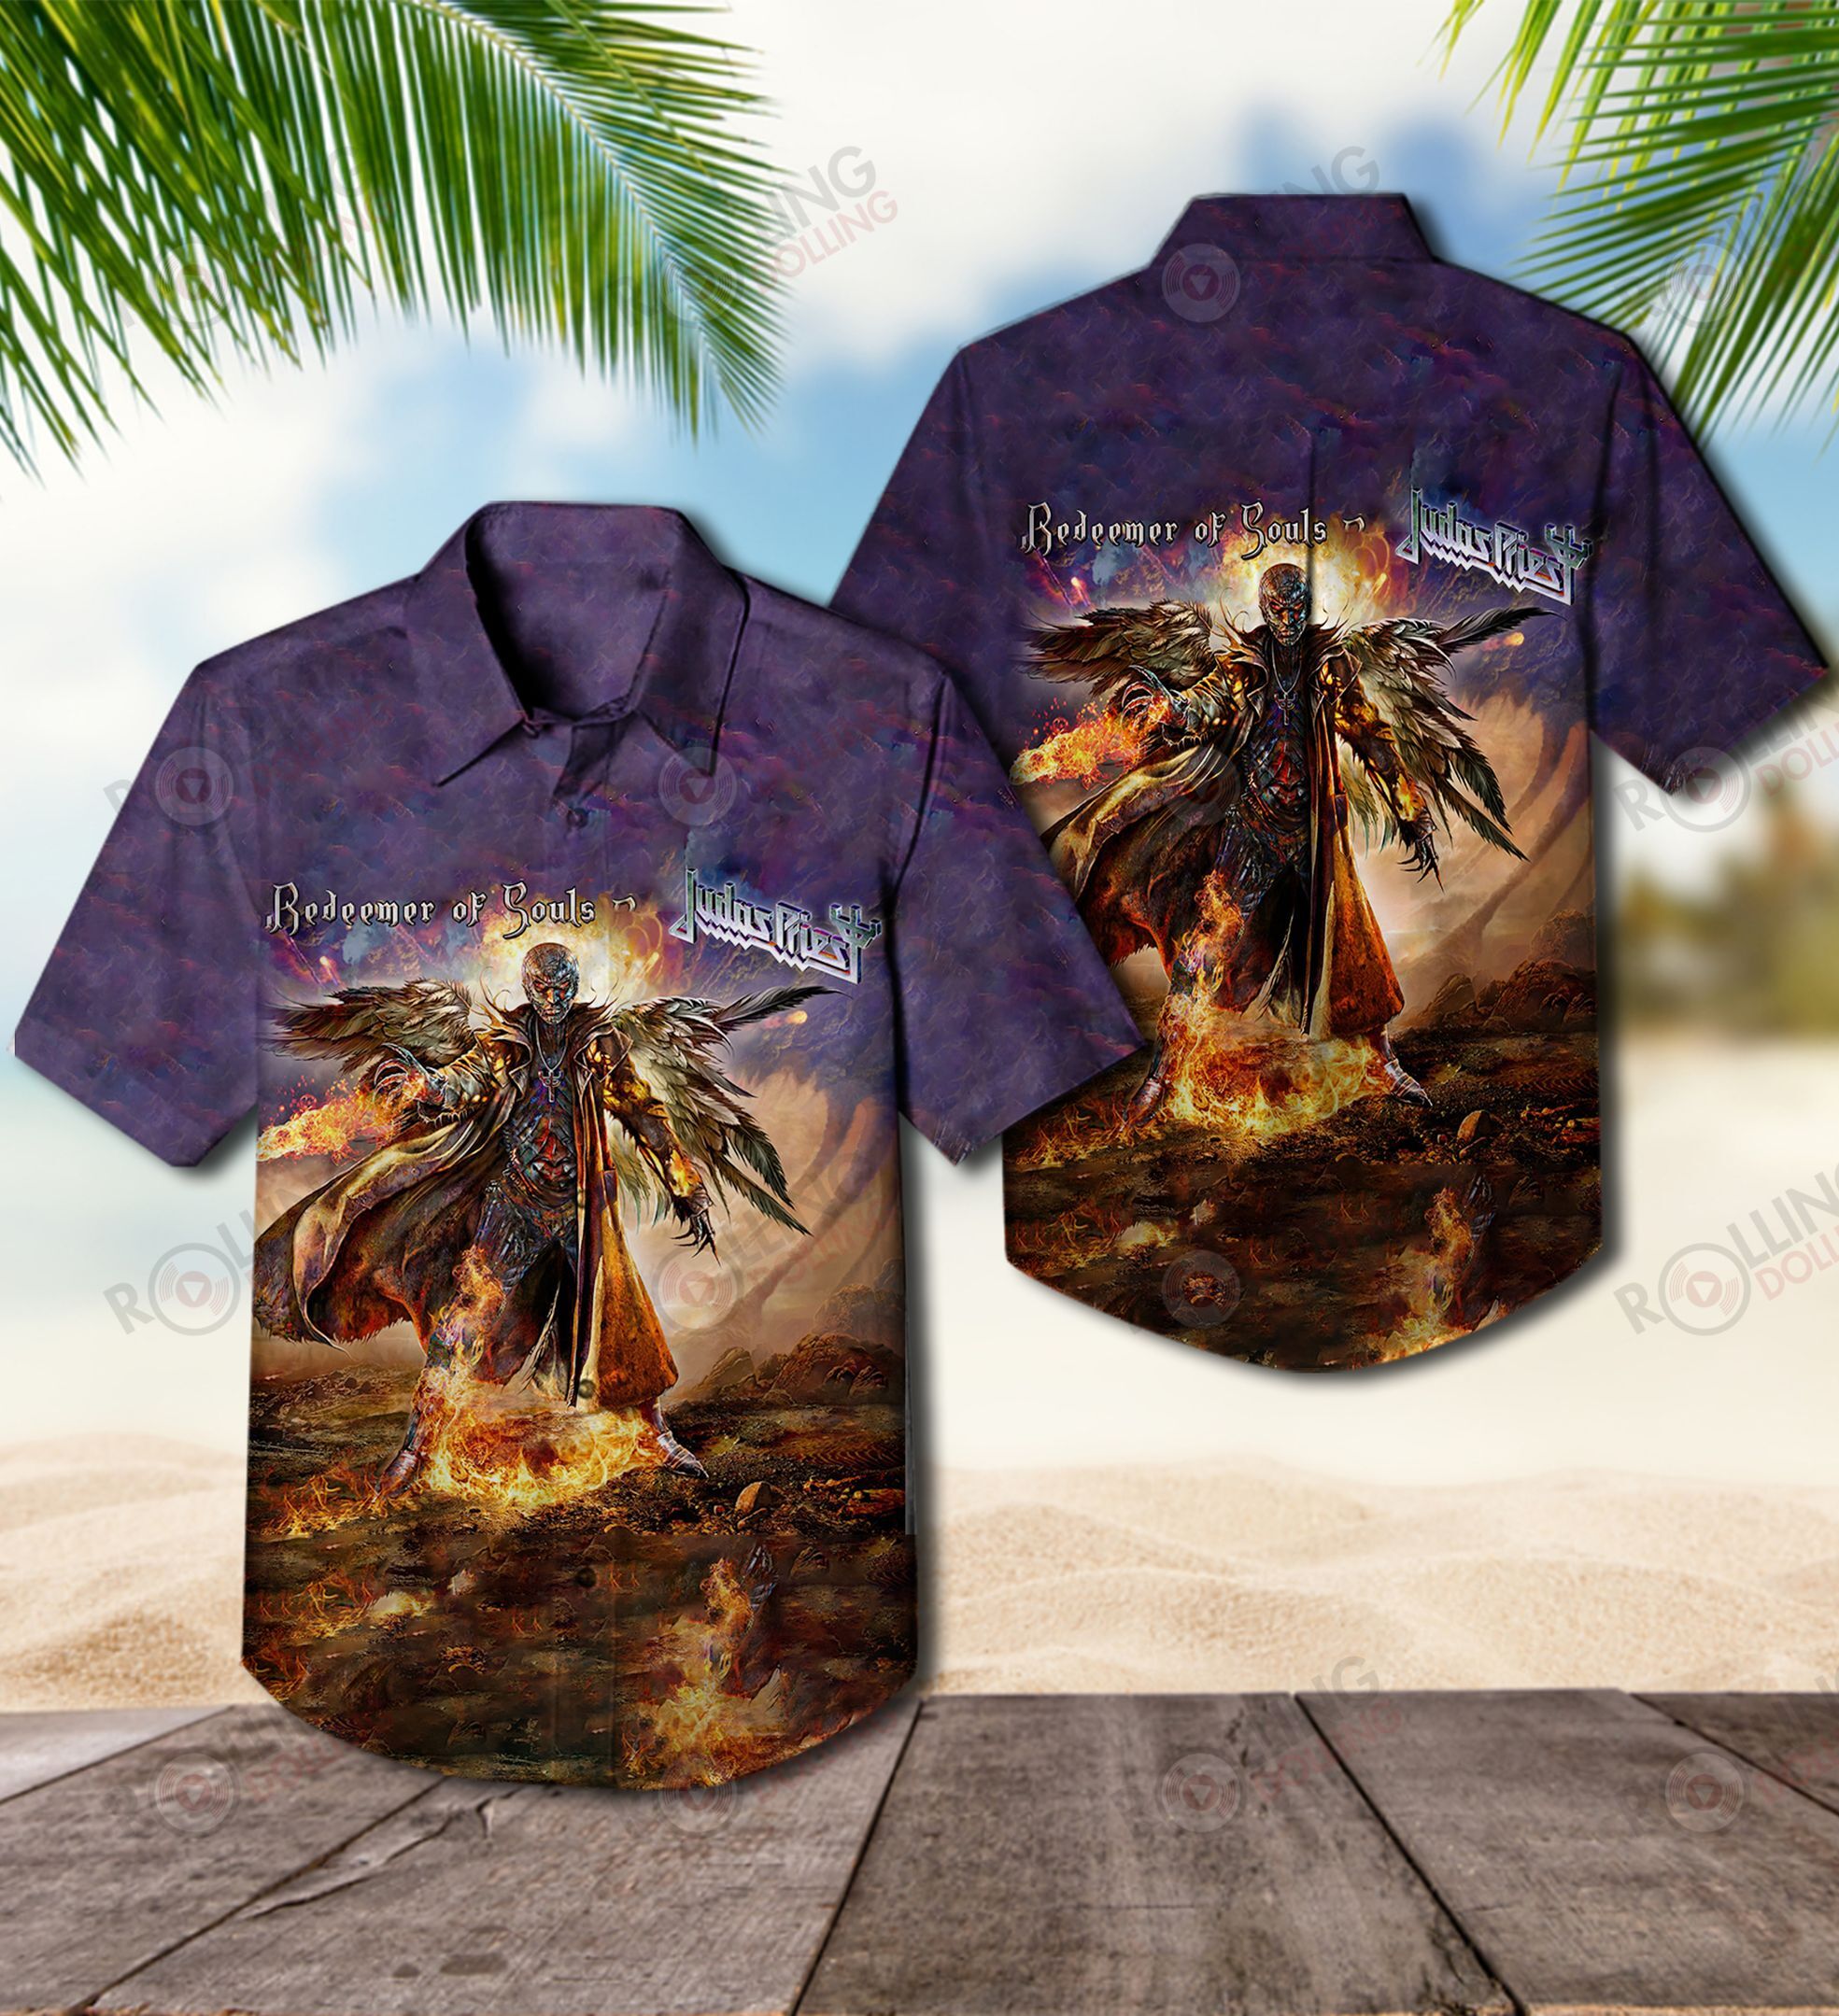 This would make a great gift for any fan who loves Hawaiian Shirt as well as Rock band 111